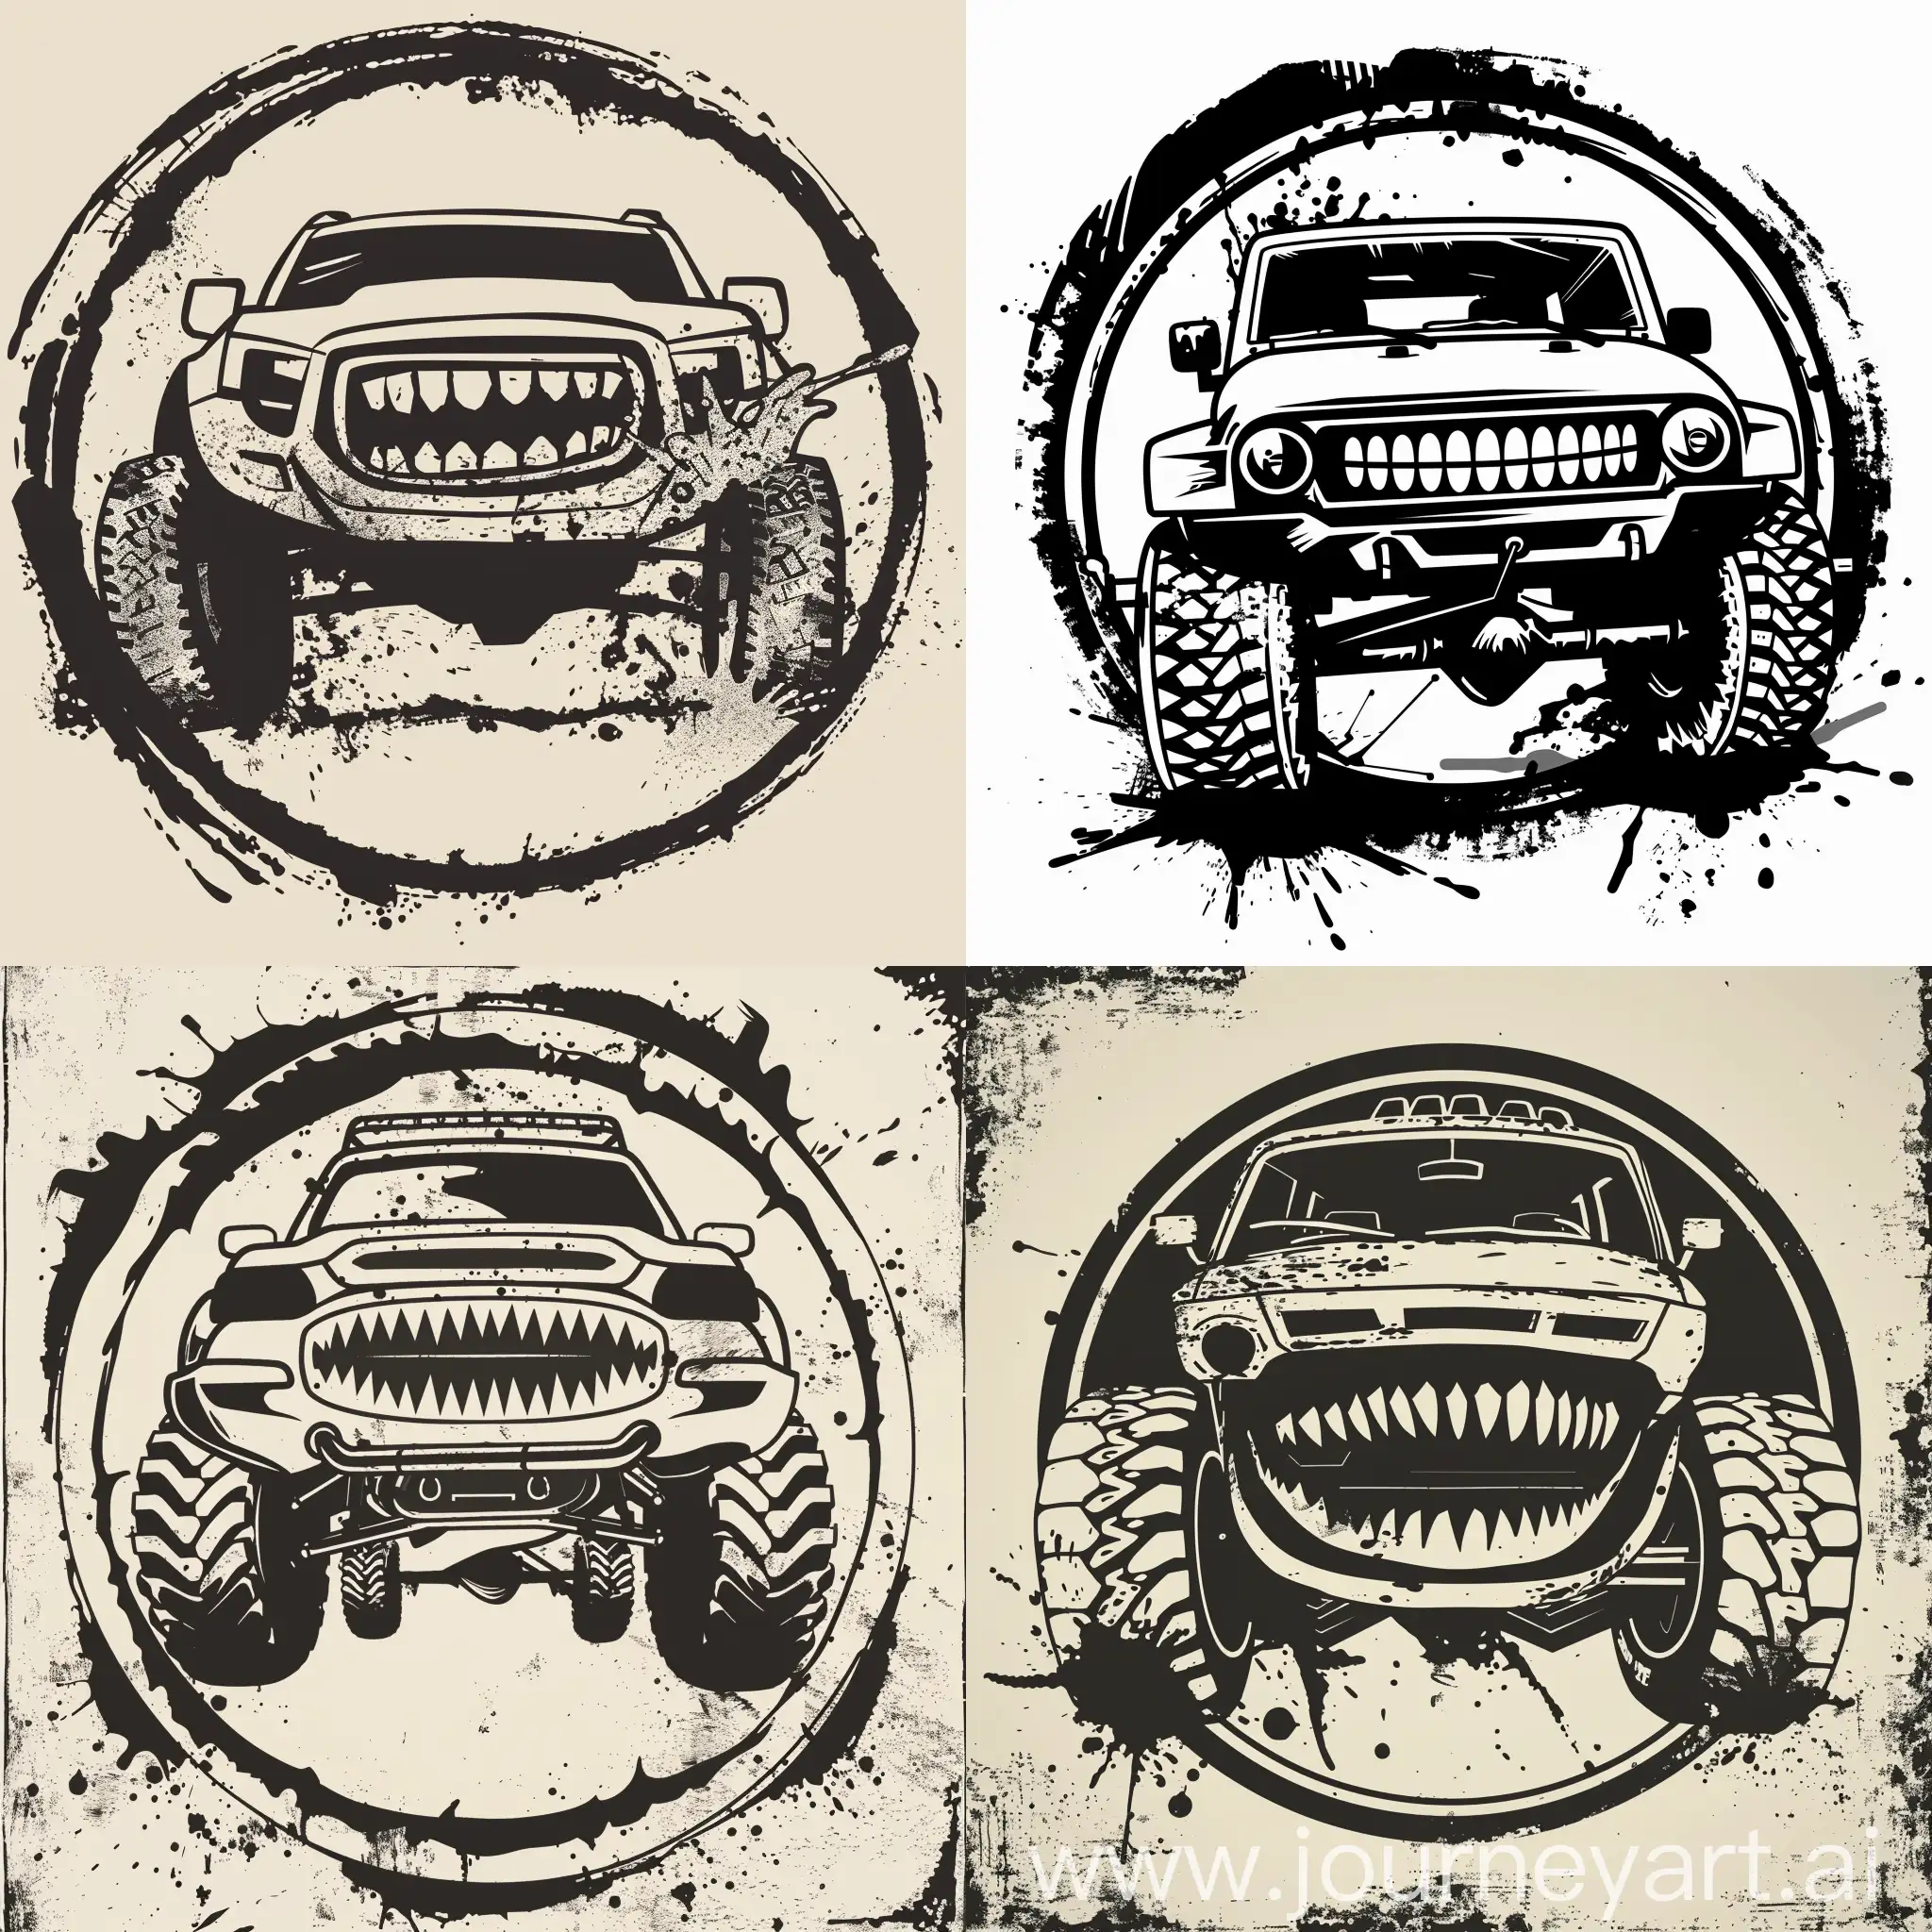 The round logo is drawn with a line silhouette, inside it is a large SUV car, with large wheels, splashes of mud. The car has a huge smile, like a man with teeth.